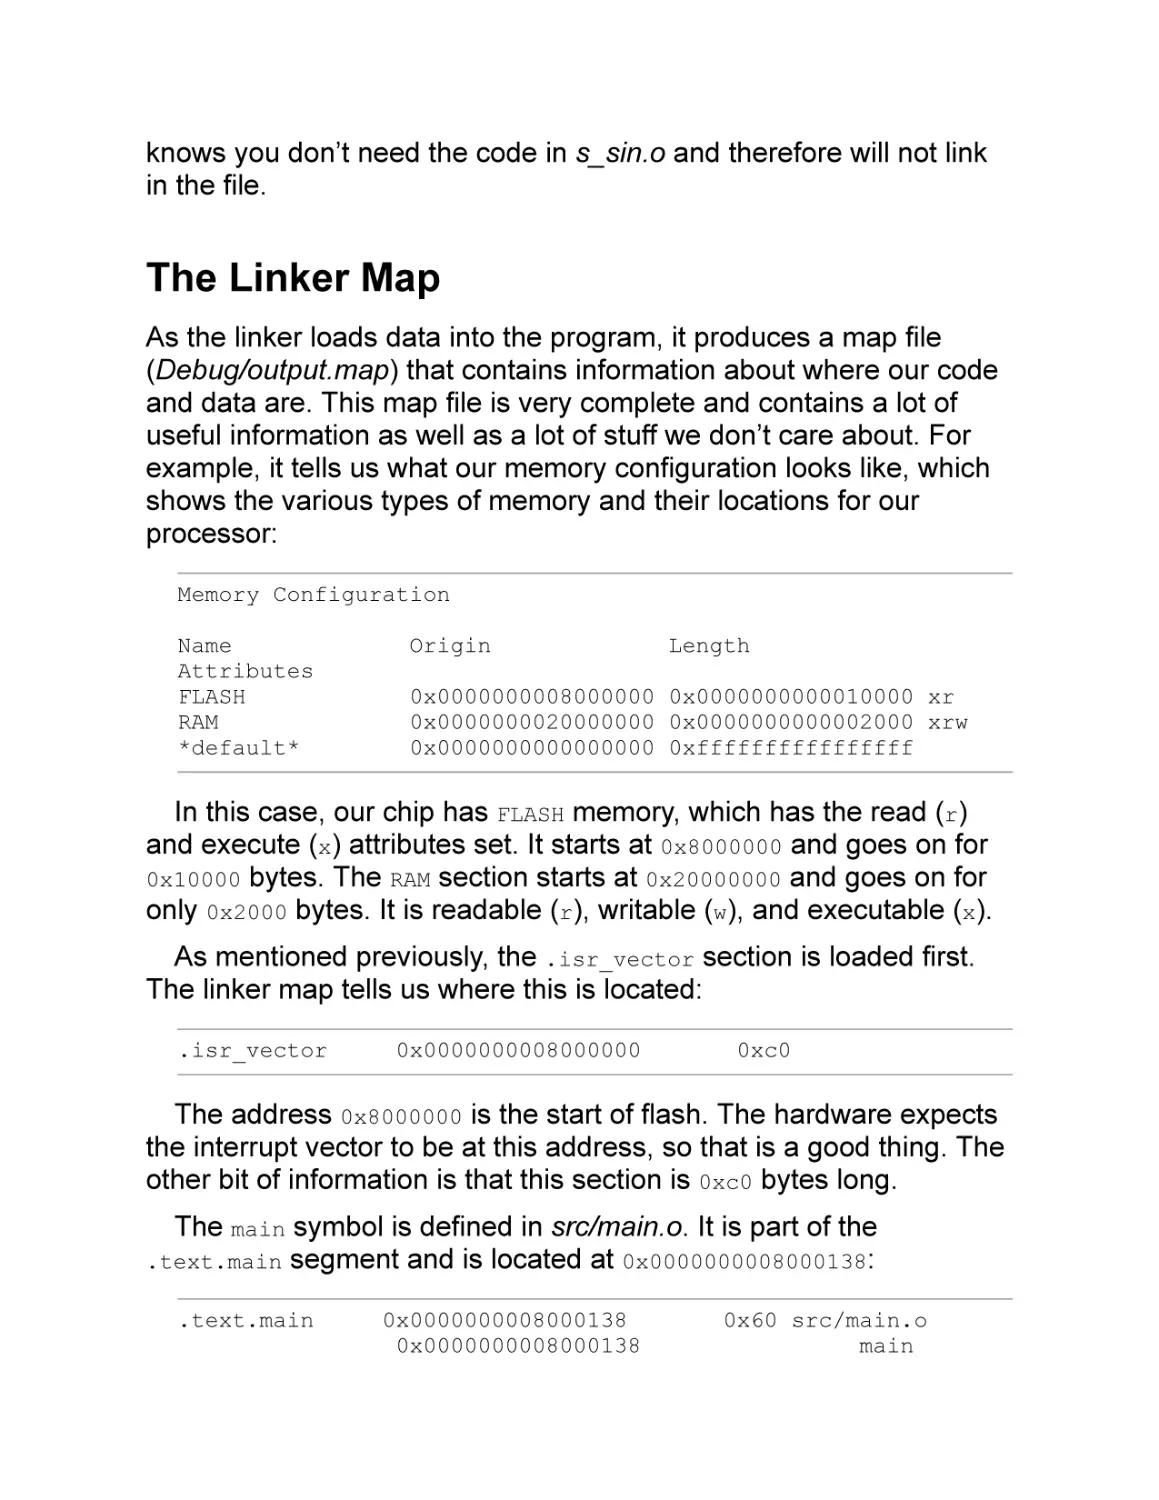 The Linker Map